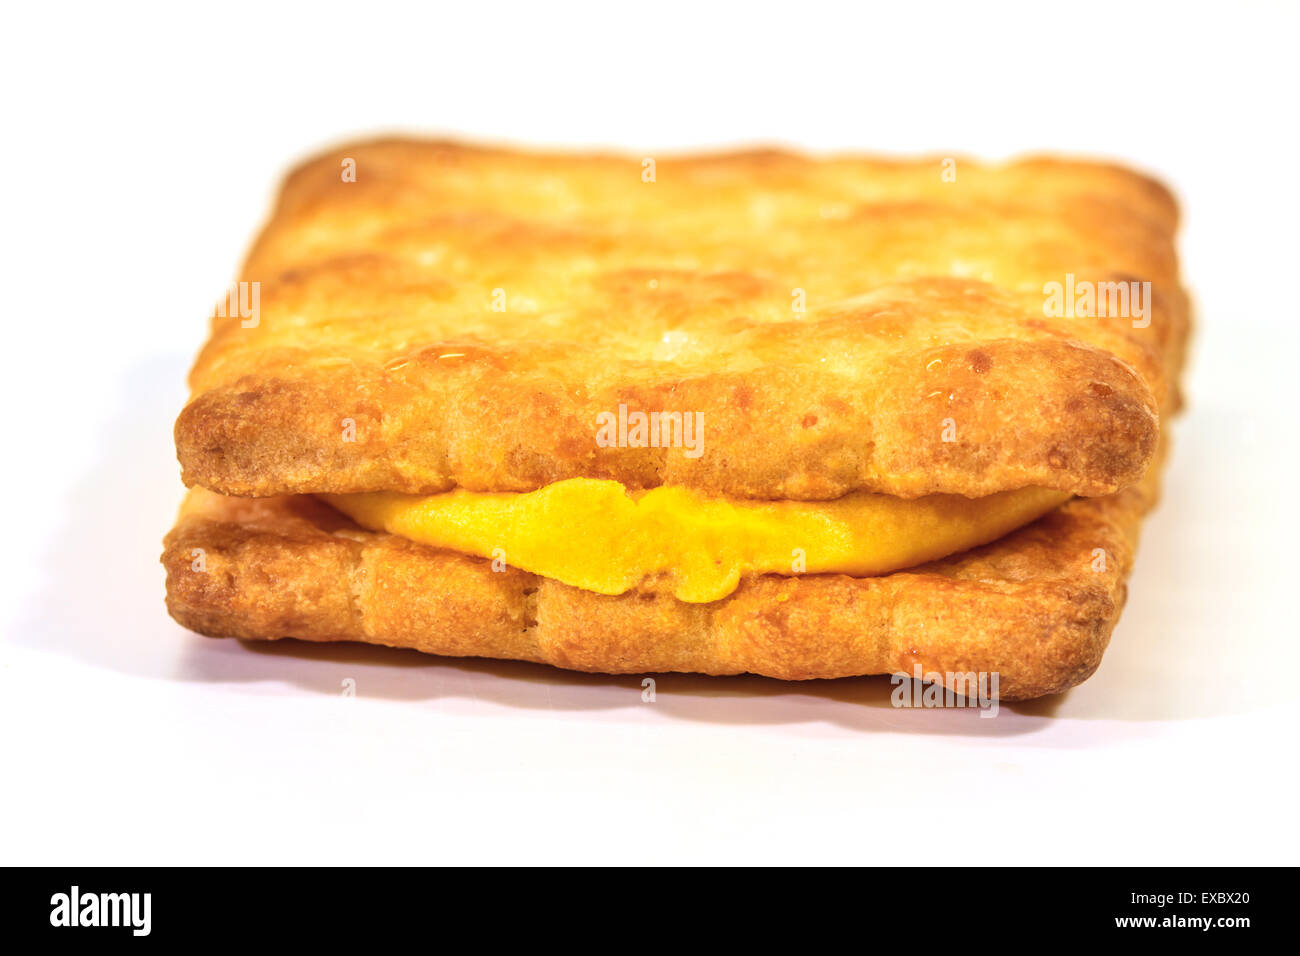 Sandwich biscuits with cream on white background Stock Photo